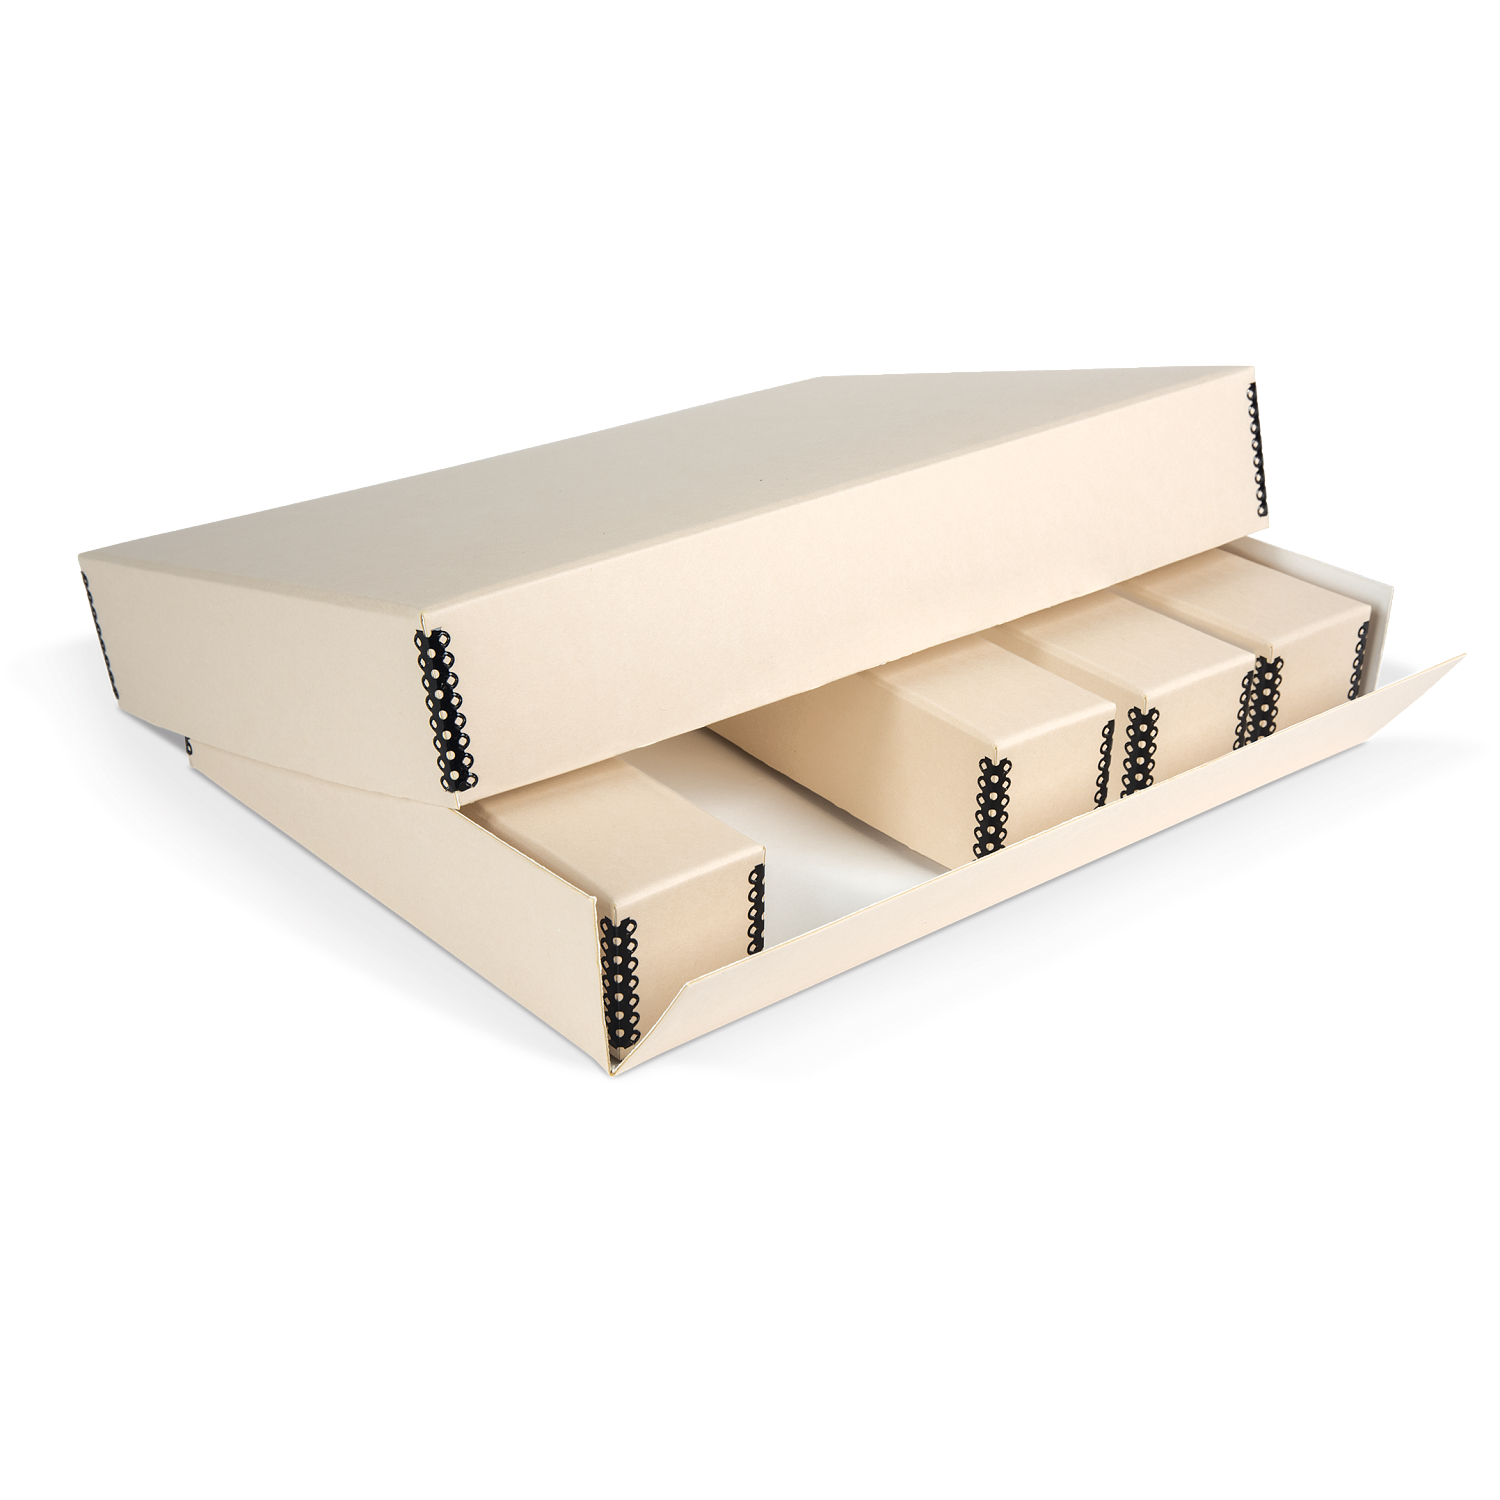 Archival Products: Archival Boxes And File Folders